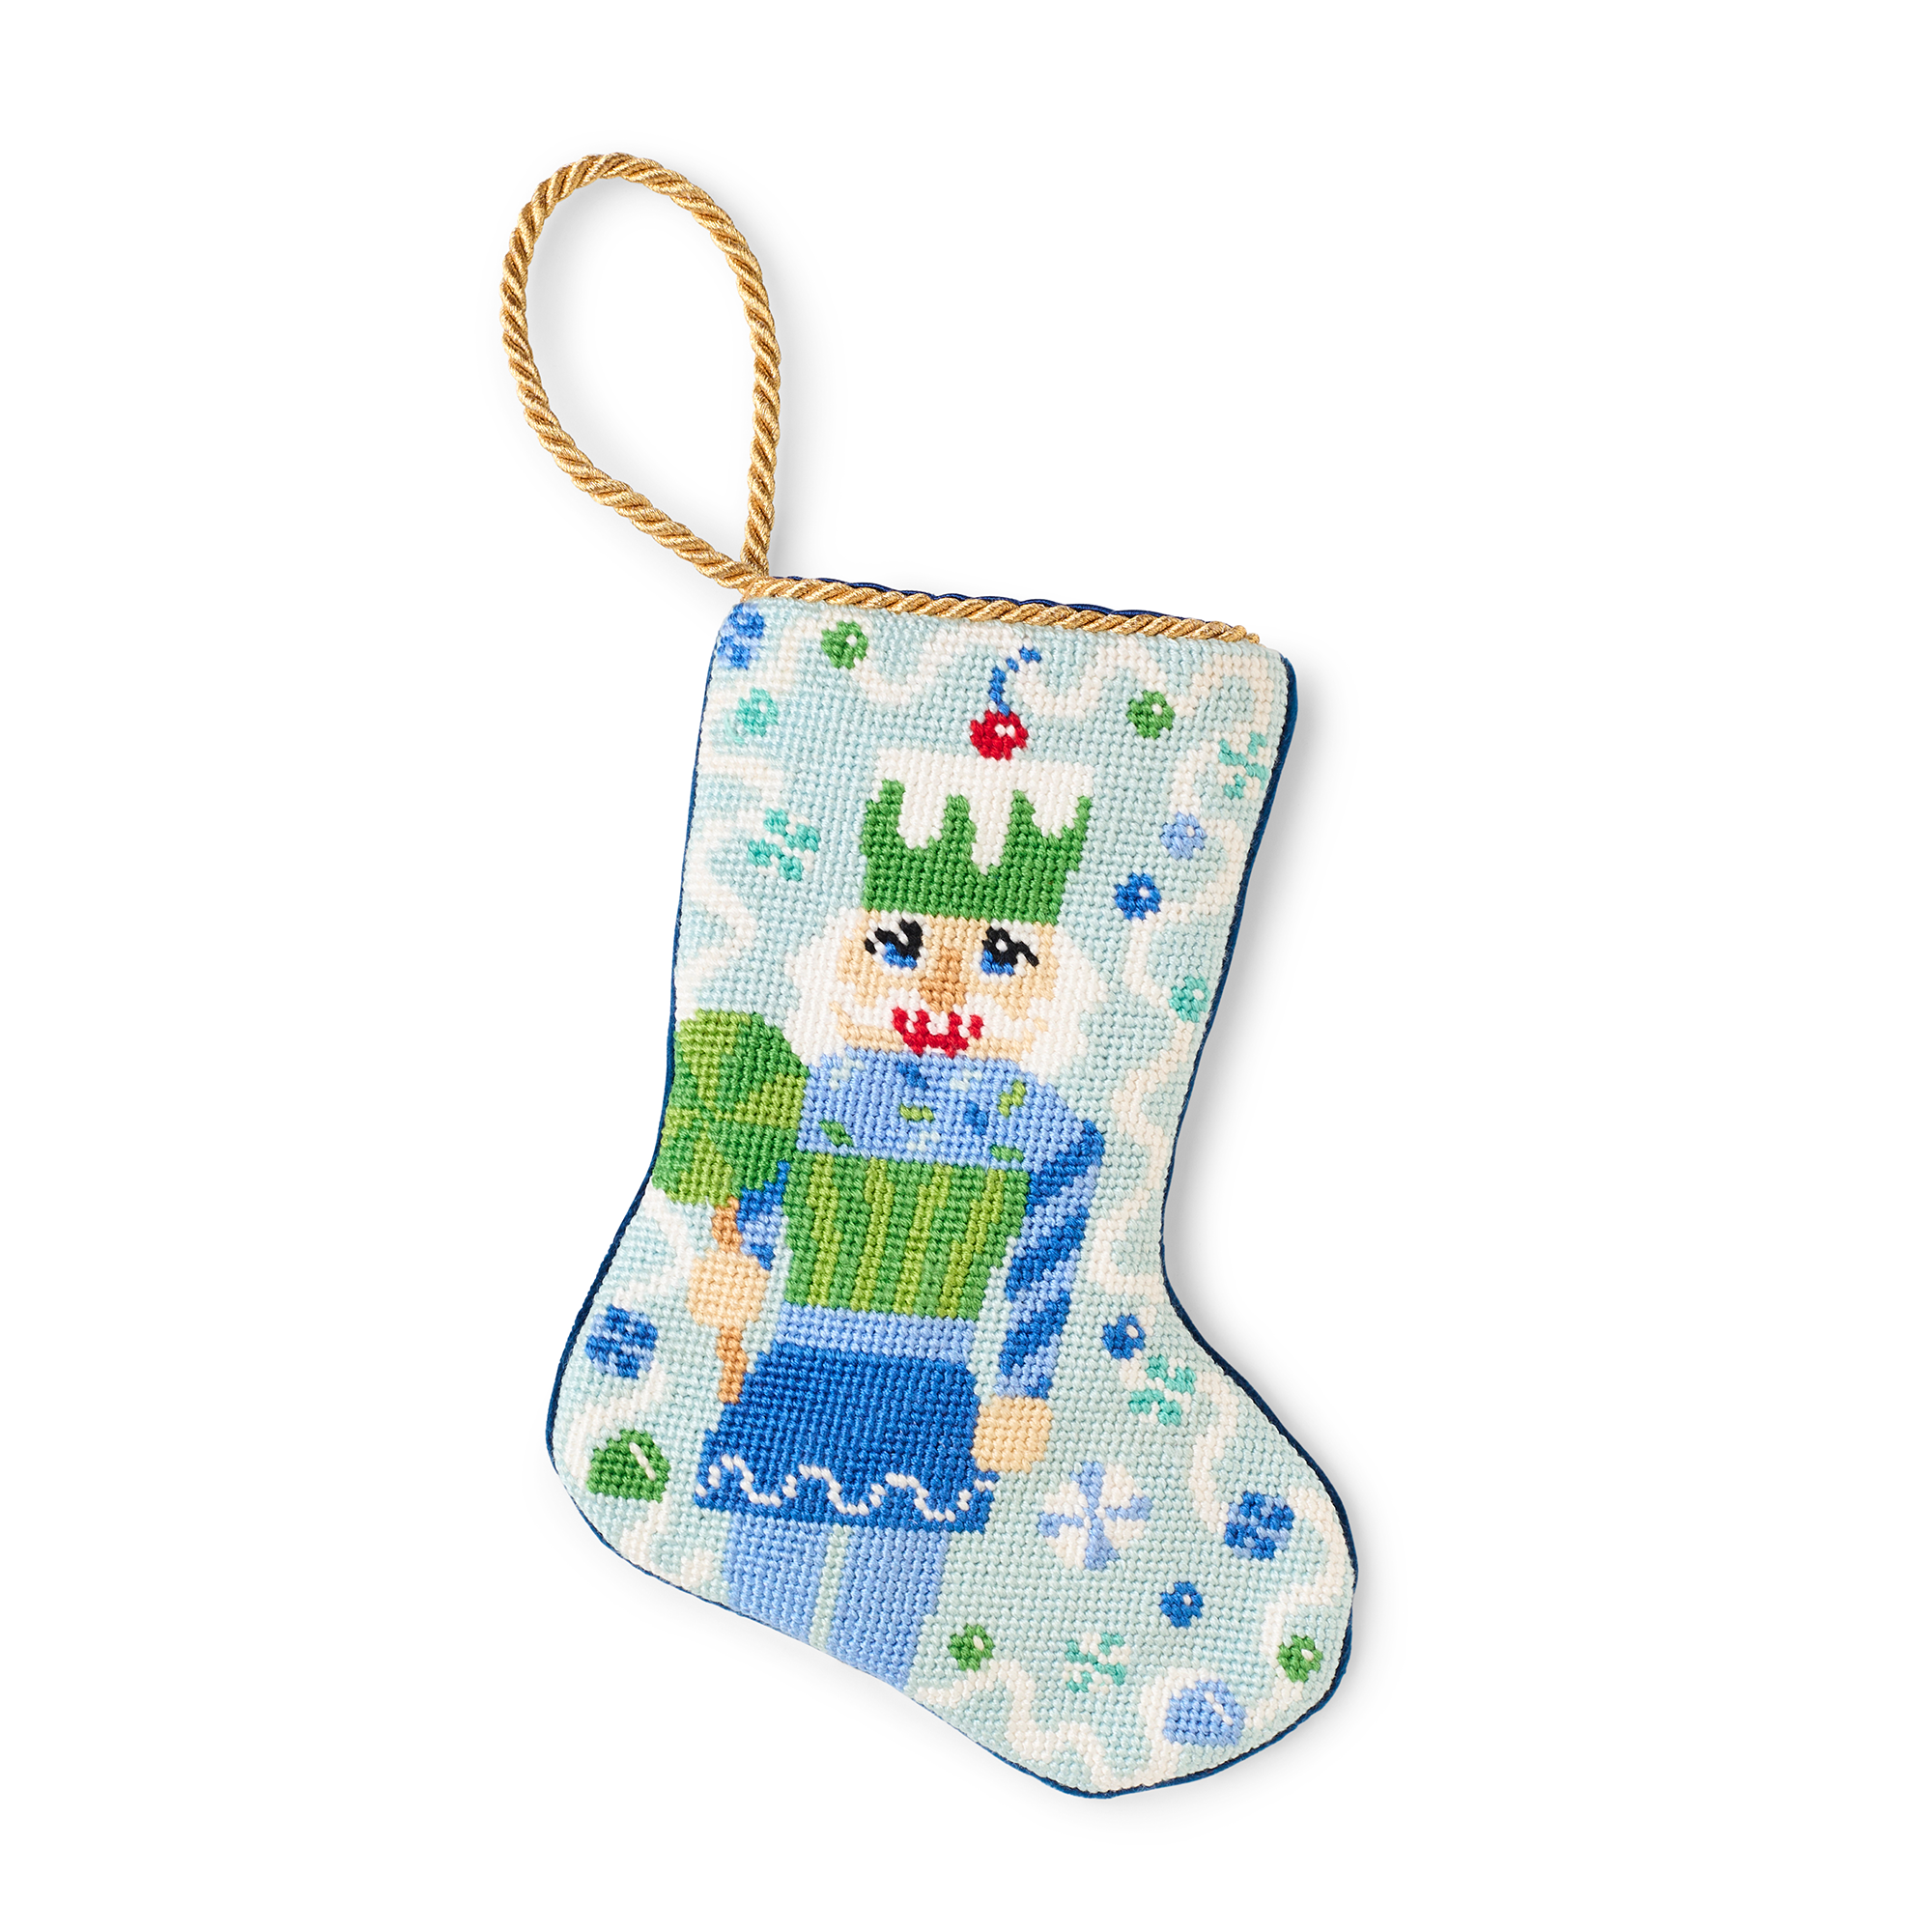 A charming Christmas stocking, featuring an illustrated Sugary Sweet Nutcracker in blue in a festive holiday scene. A gold loop at the top, is making it perfect as tree ornament, place setting, or for hanging by the fireplace.